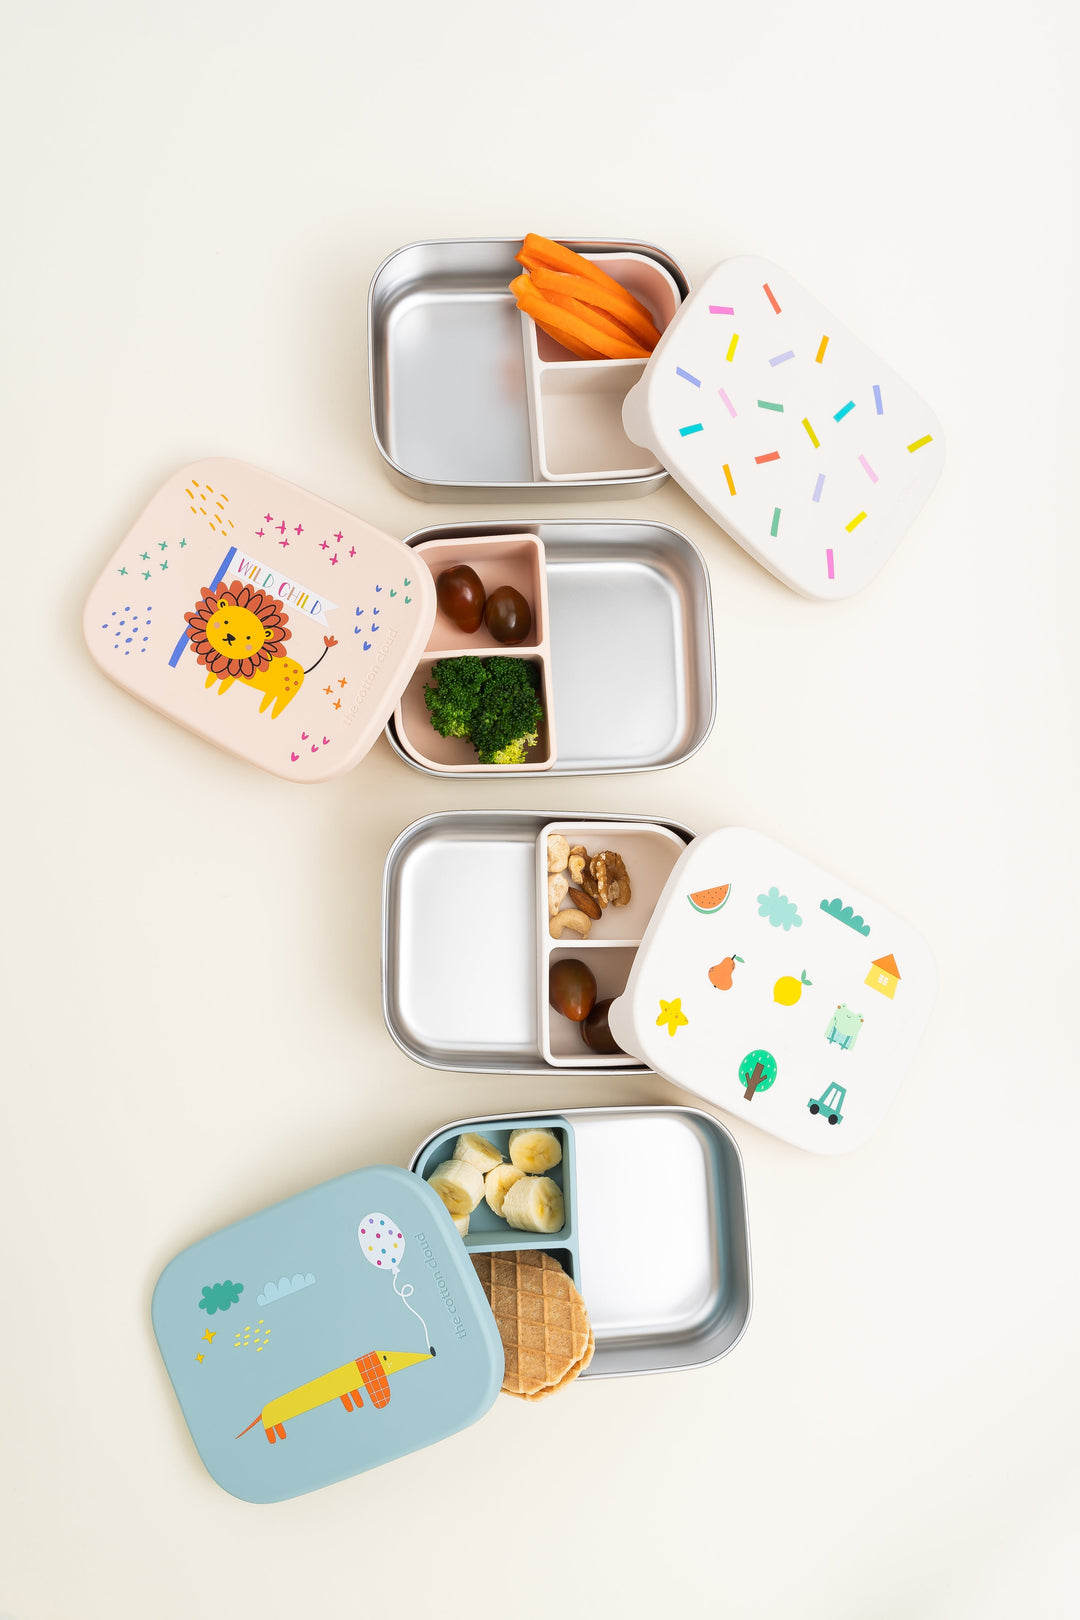 Confetti stainless steel lunch box with removable compartments